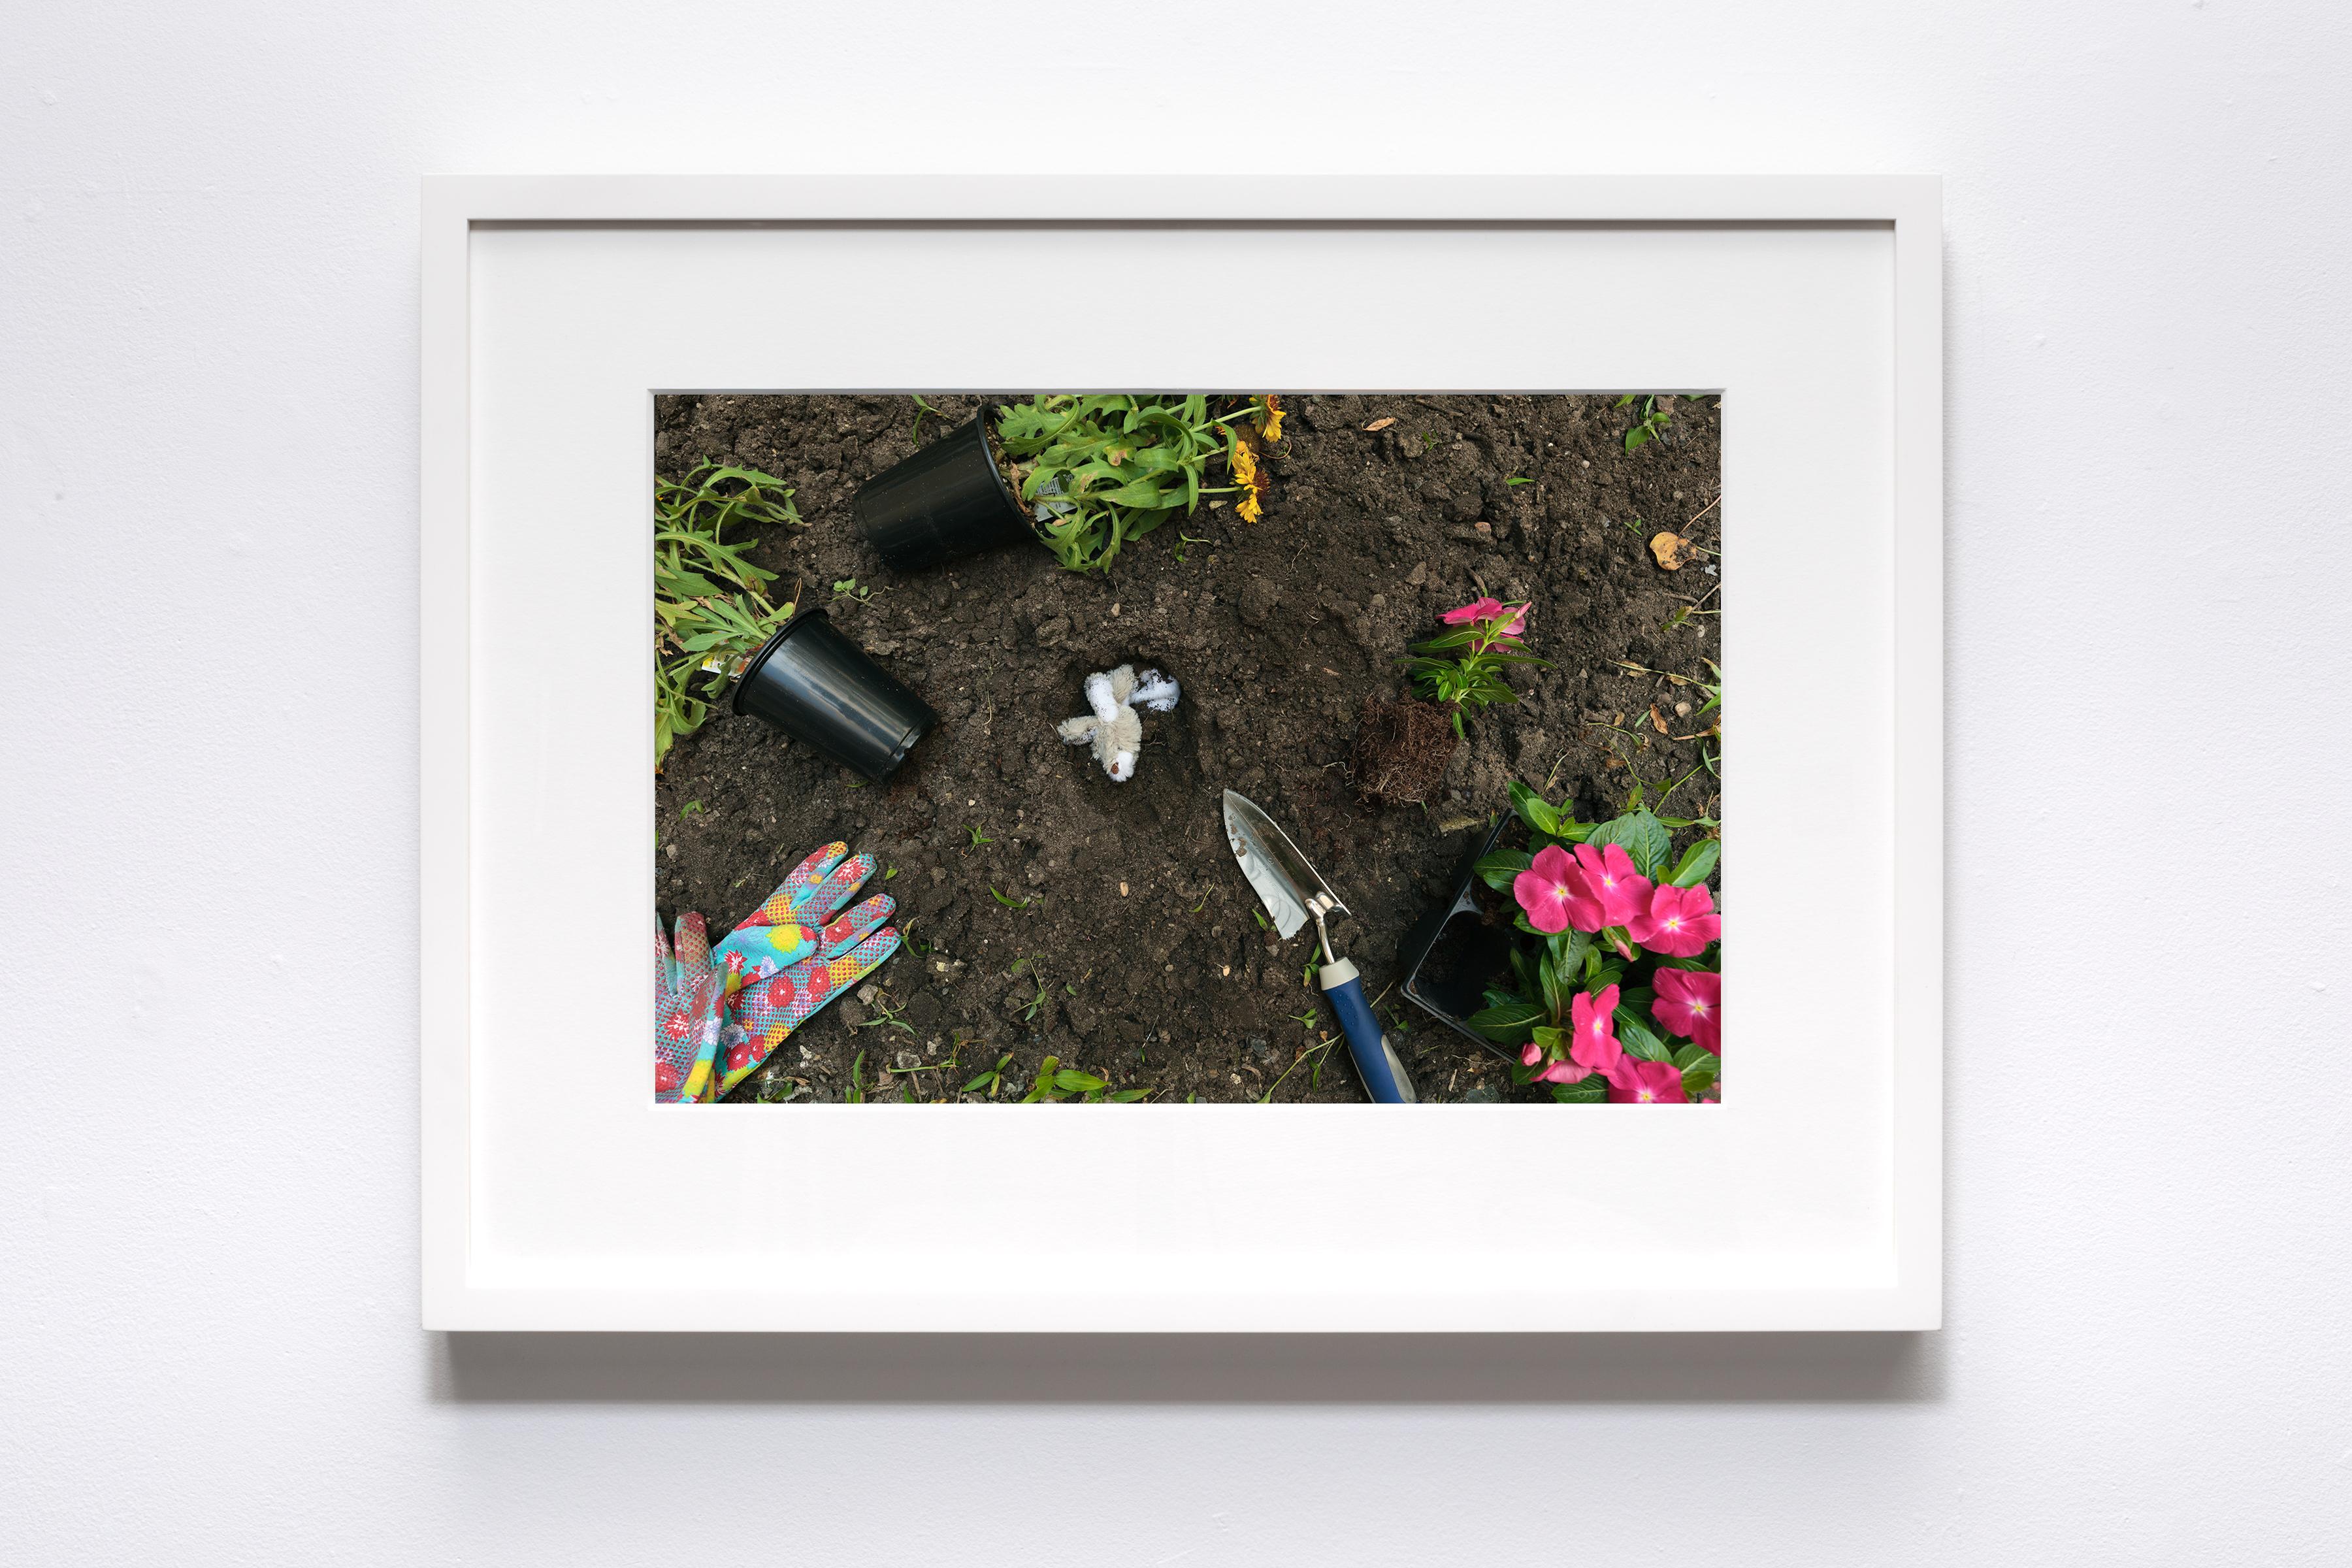 “Morbidity & Mortality: Hare” Humorous Photograph of Bunny in a Crime Scene  - Contemporary Print by Jeanette May